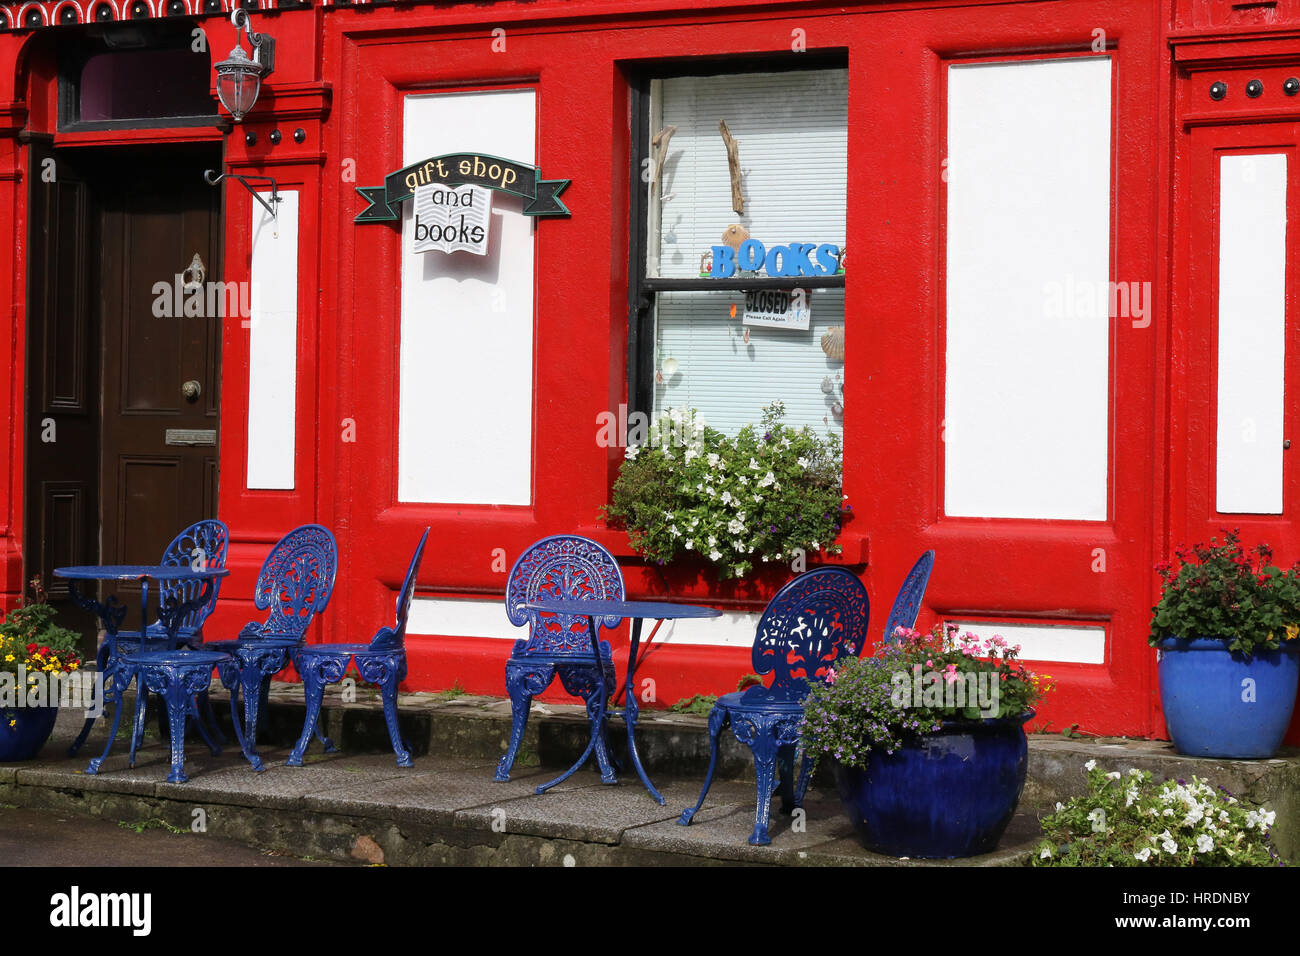 Knightstown Coffee - coffee shop, cafe, restaurant and bookstore at Knightstown, Valentia Island, County Kerry, Ireland. Stock Photo